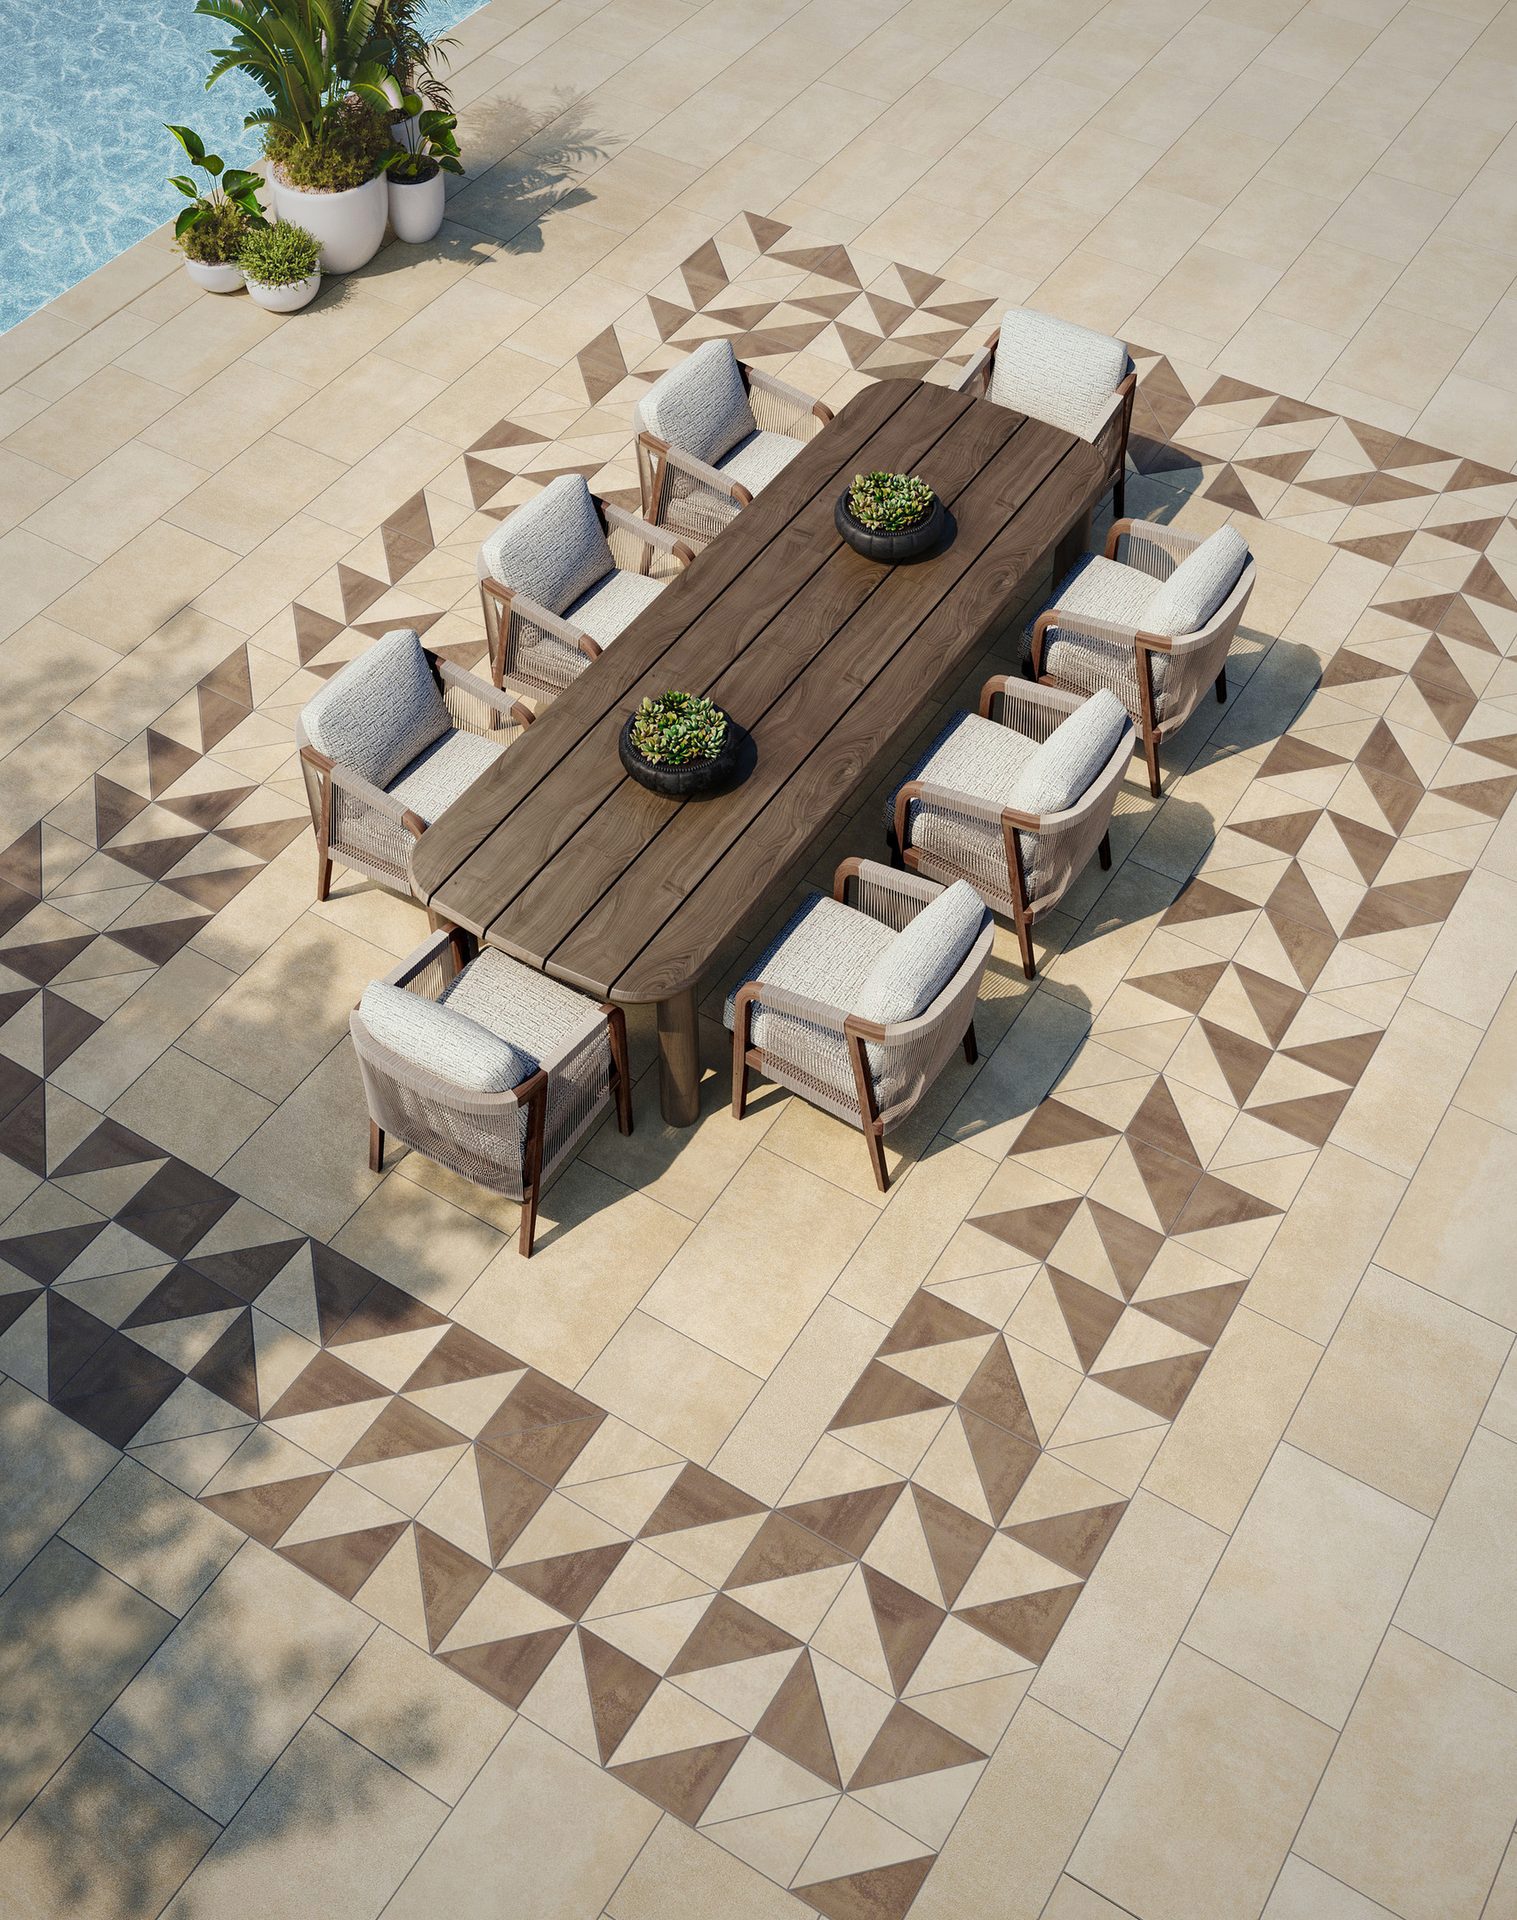 Areal view of a dining area with a triangular mosaic design in the patio.